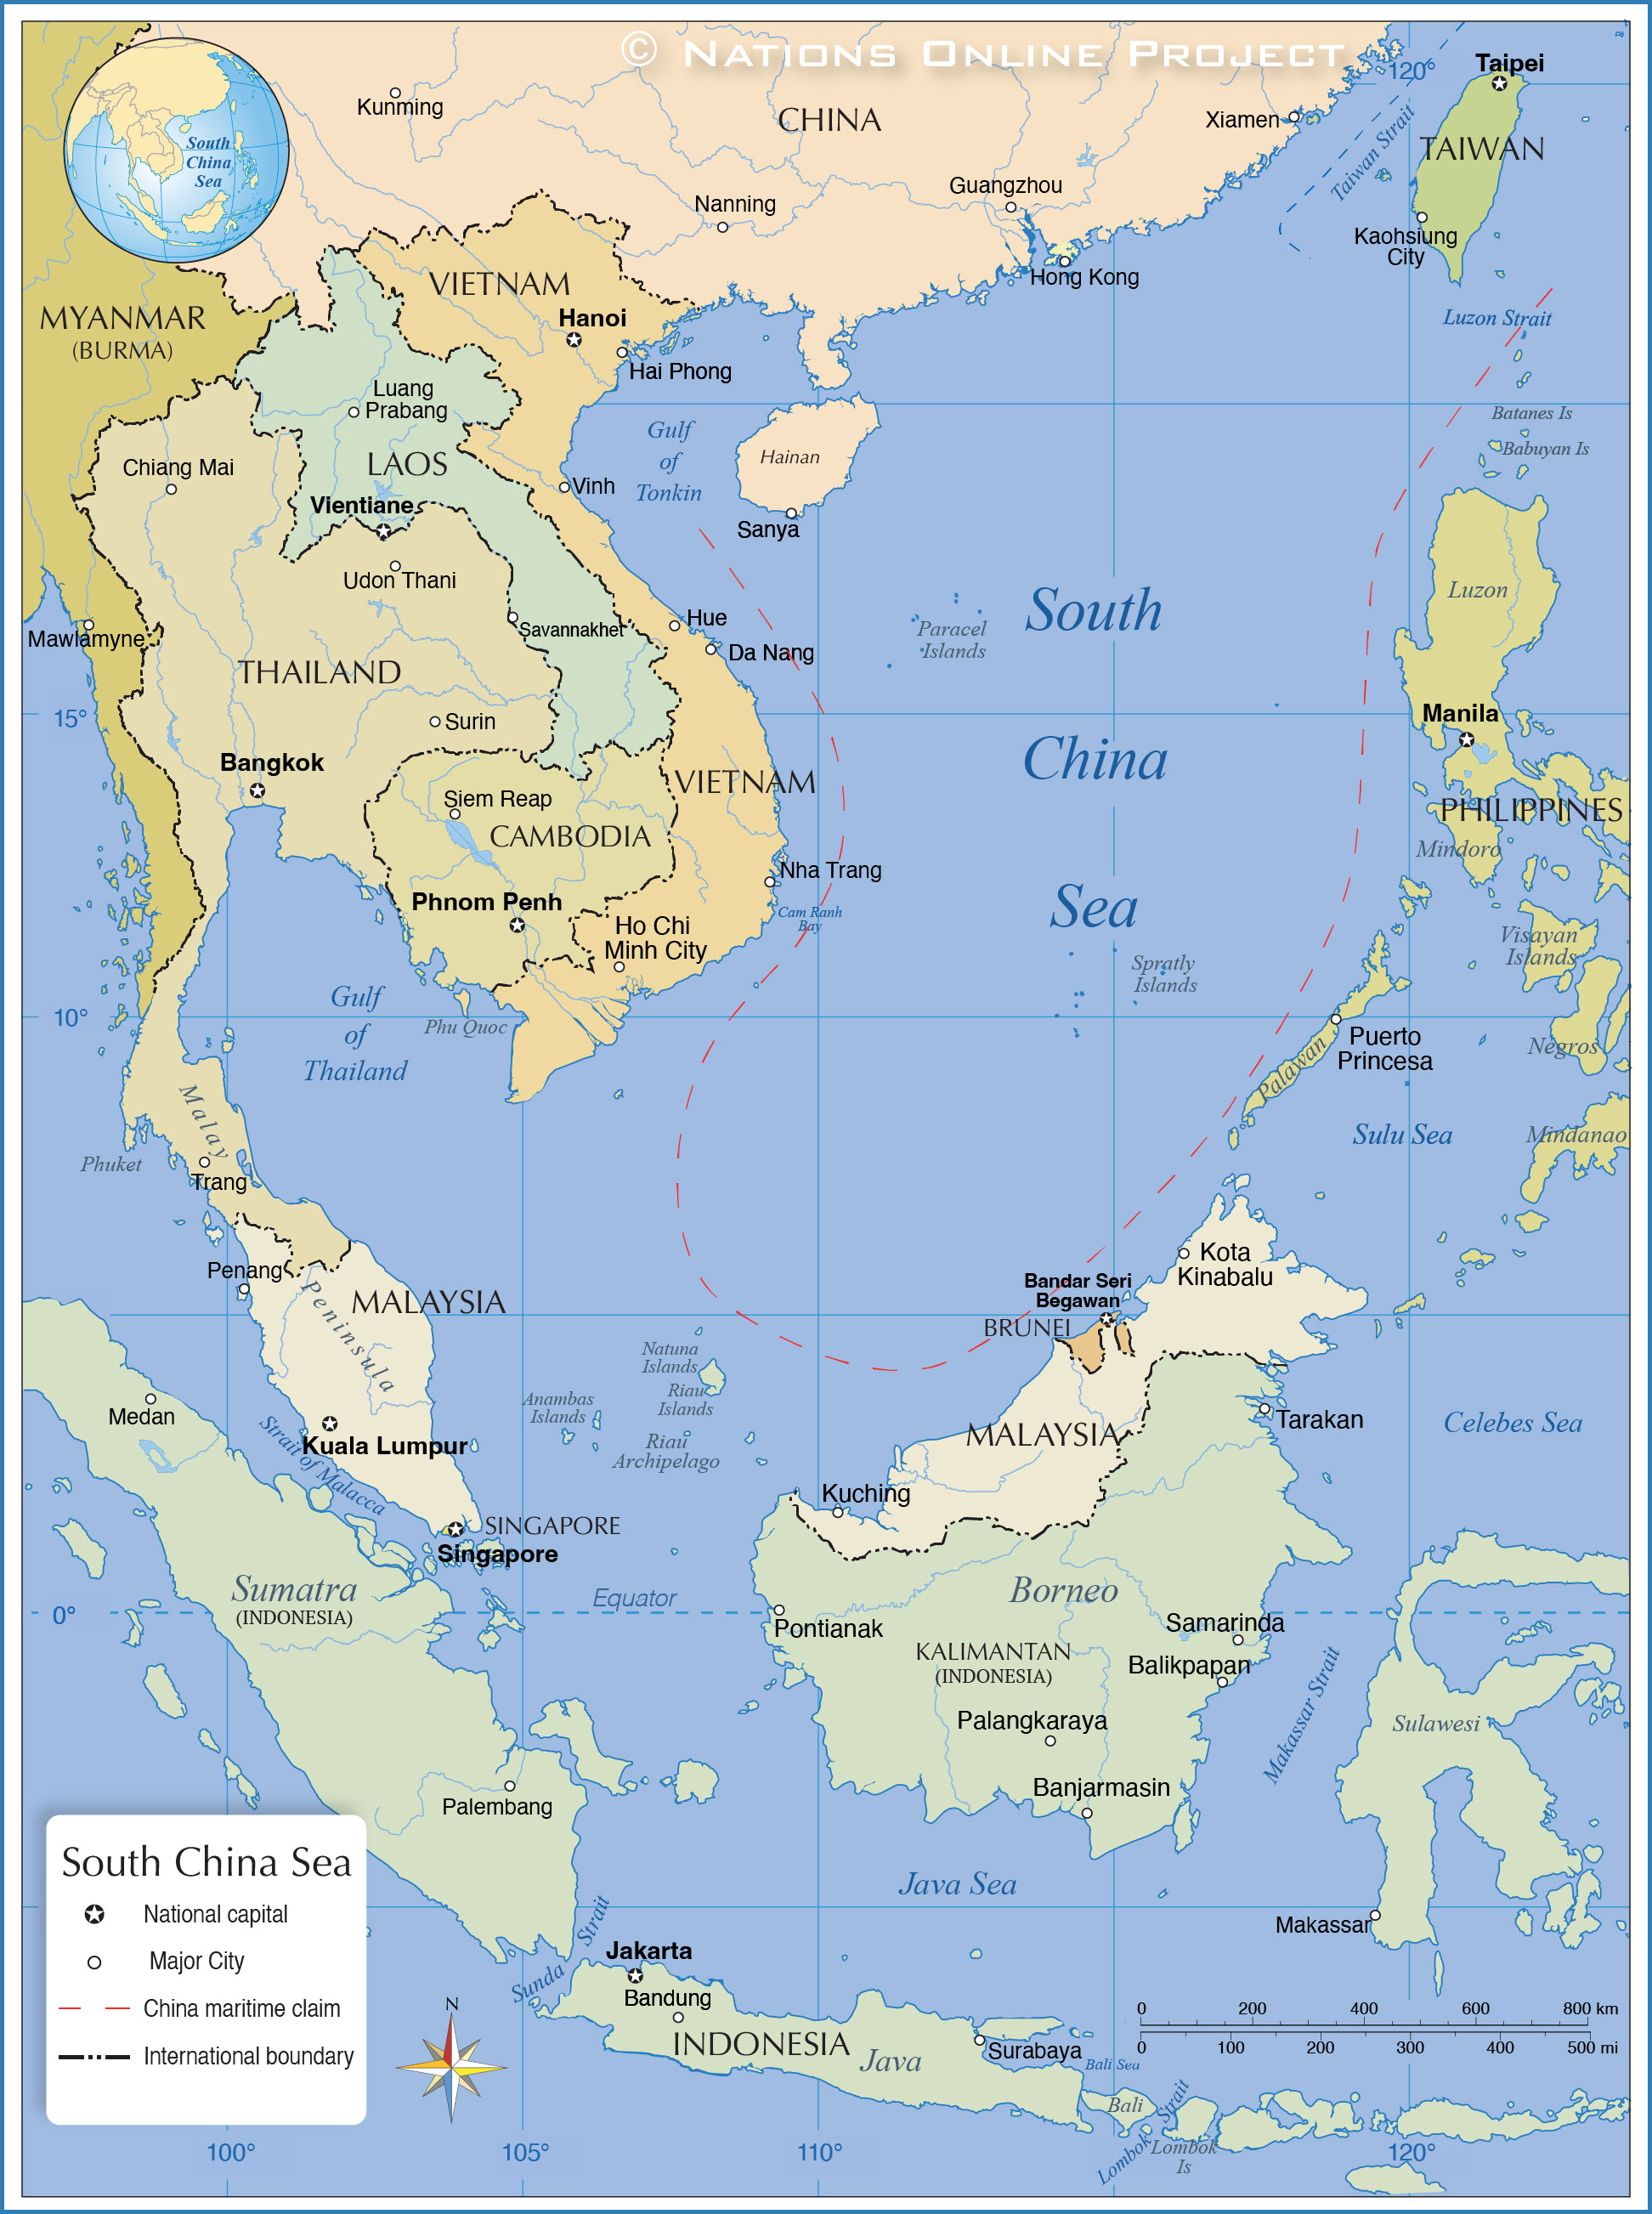 World Map South China Sea Political Map of the South China Sea   Nations Online Project